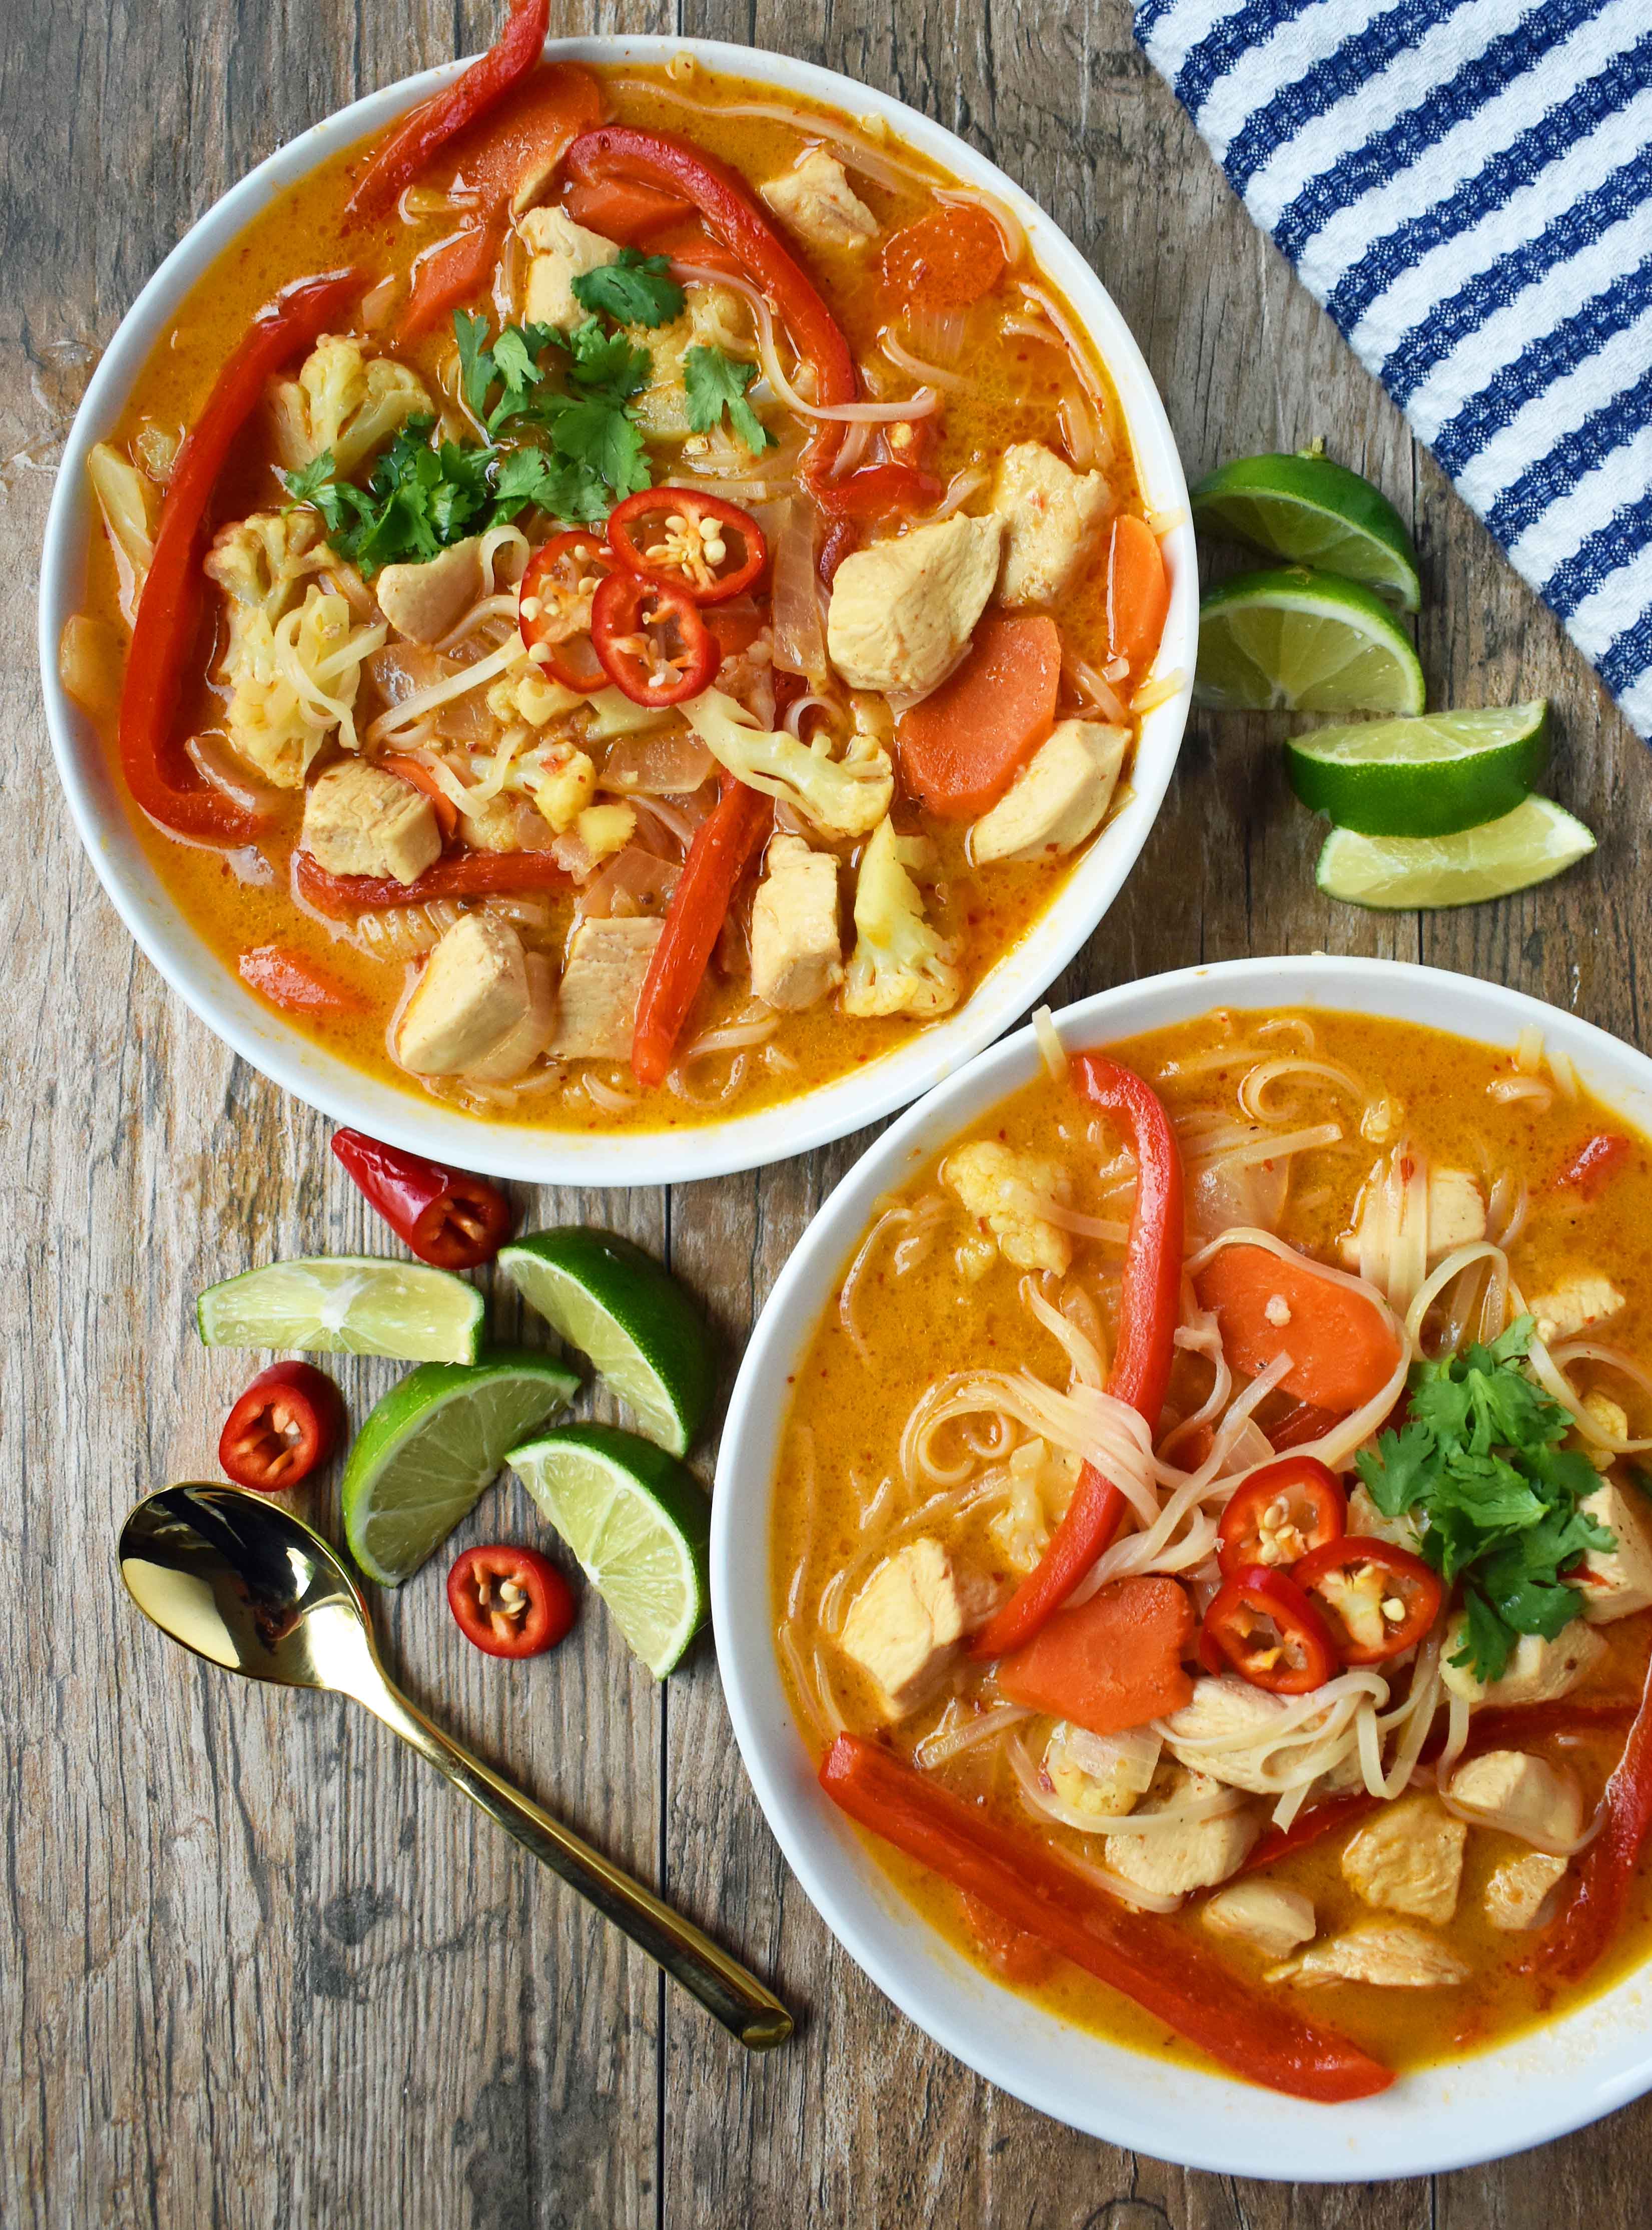 Thai Chicken Noodle Soup. Gluten-free and Dairy-Free nutritious soup that is full of flavor. A rich coconut milk red curry based broth filled with onions, carrots, ginger, cauliflower, and red pepper. A healthy and delicious soup that everyone loves! www.modernhoney.com